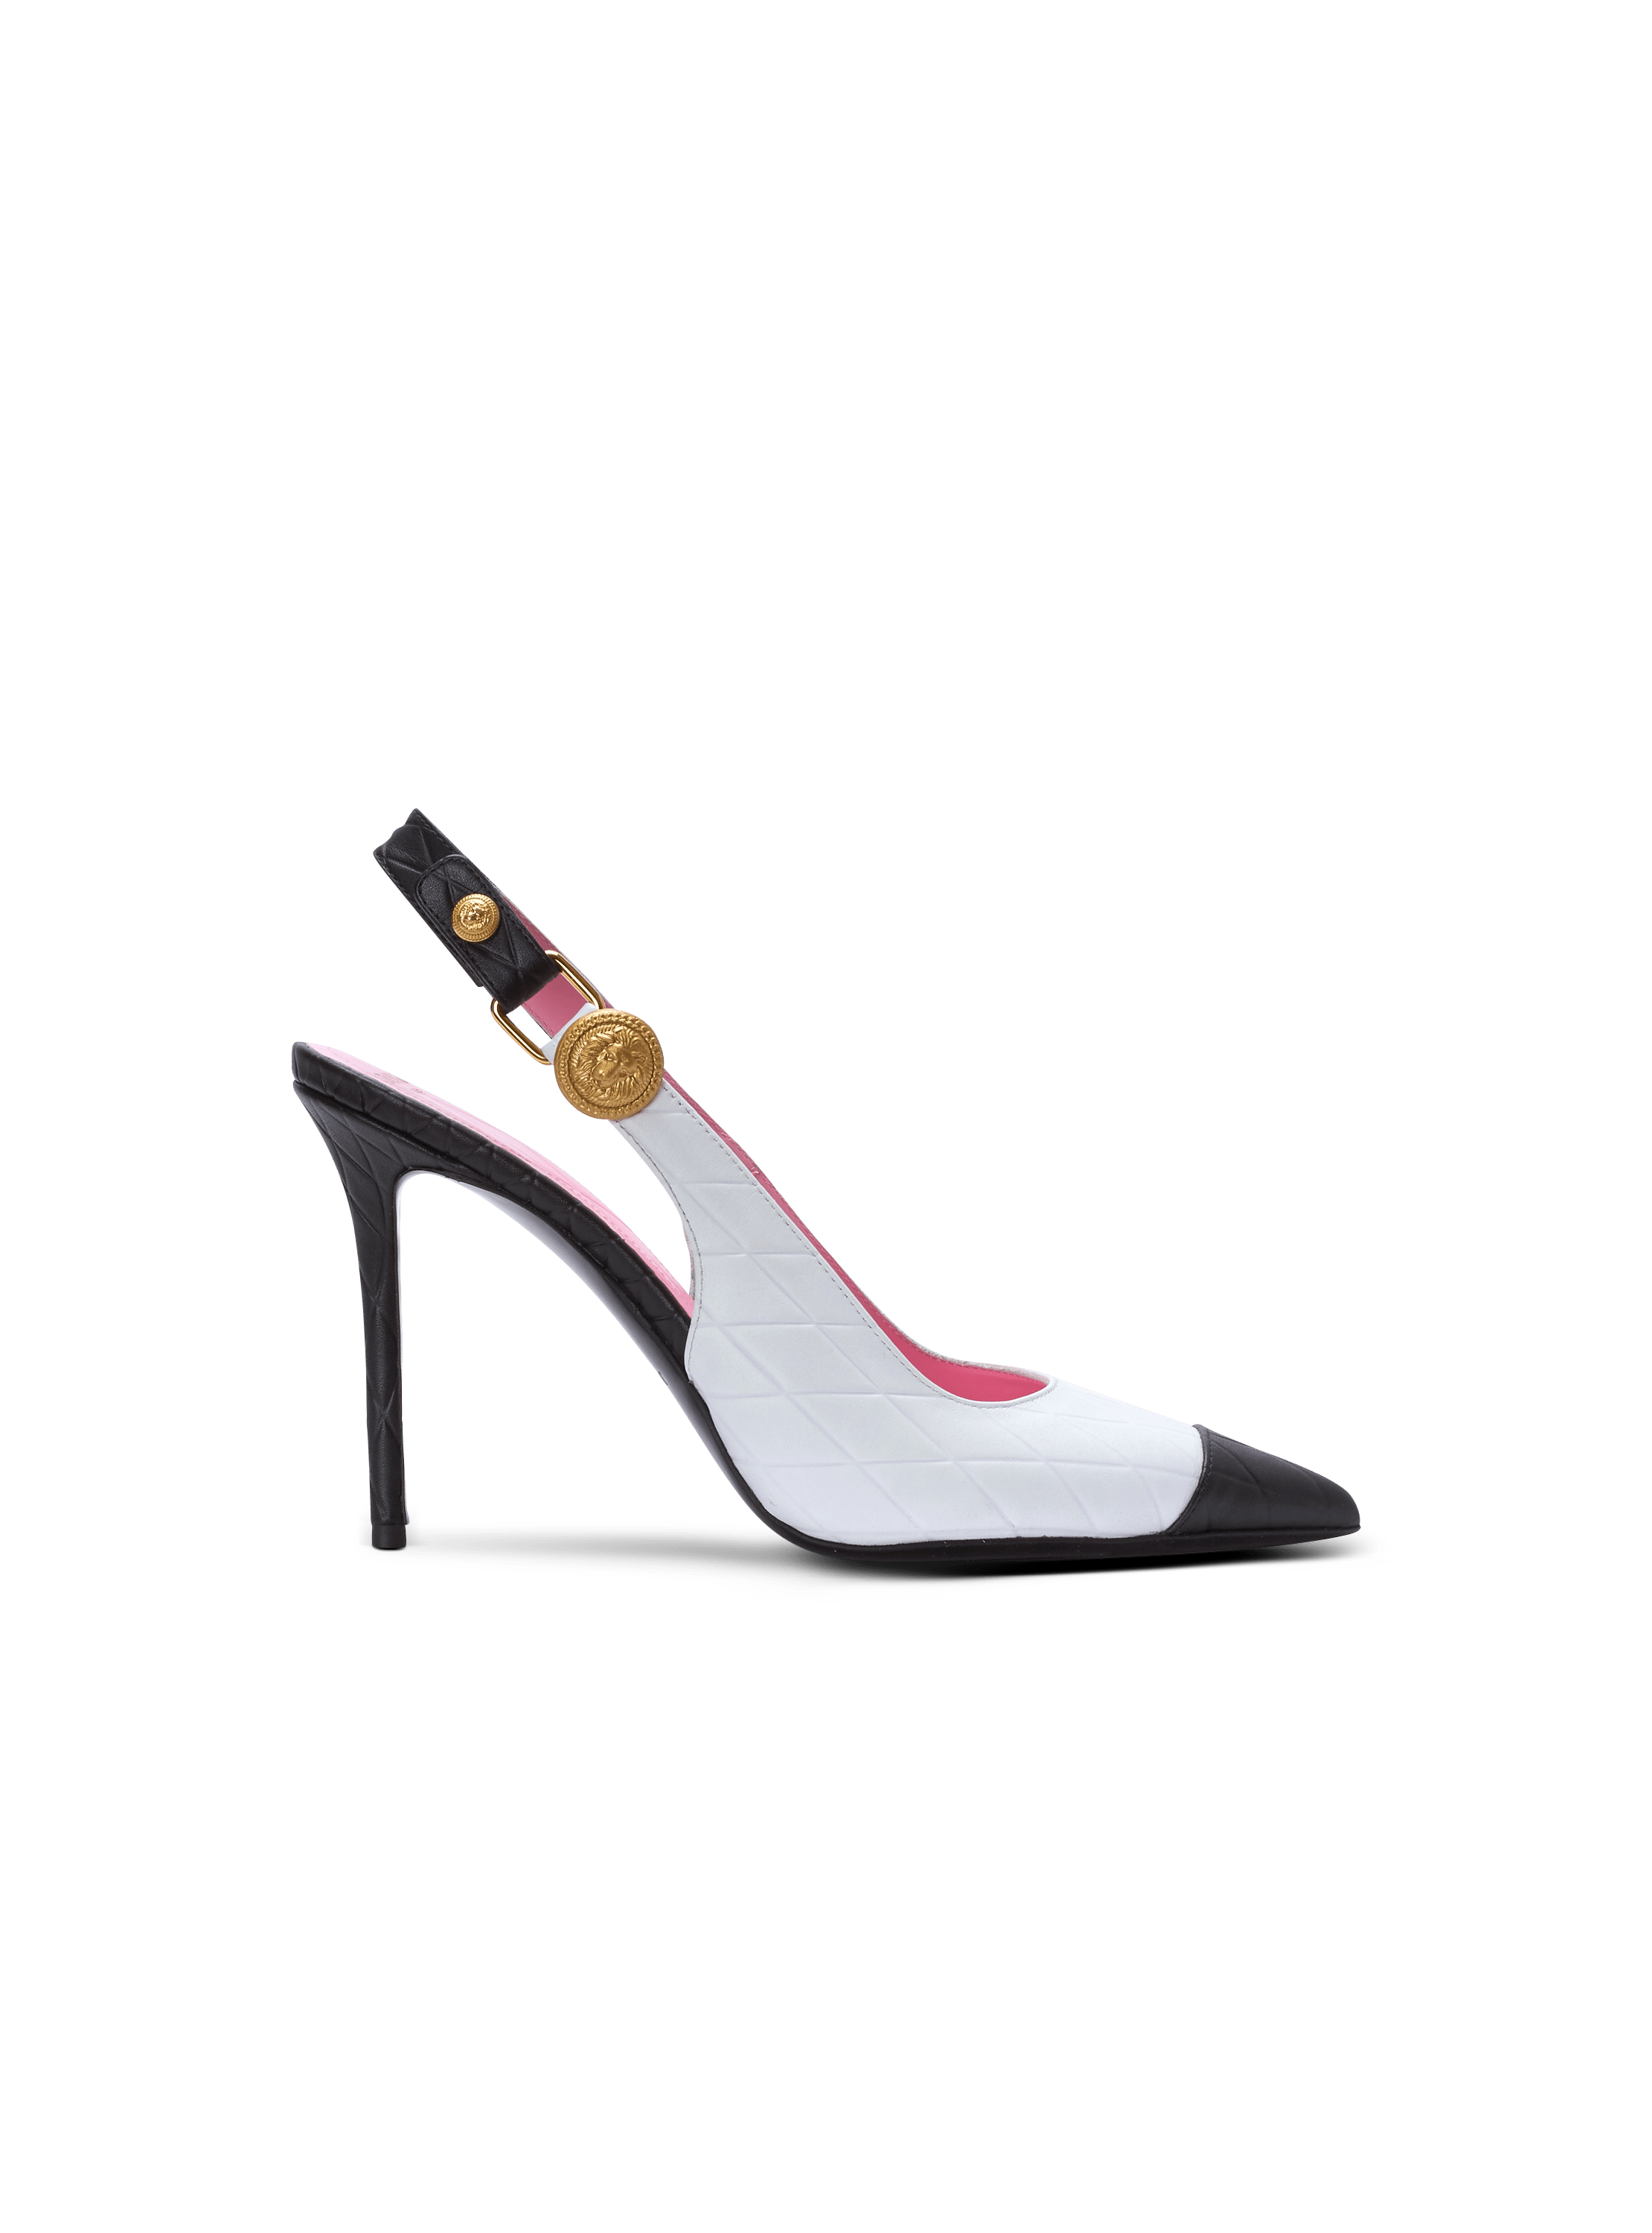 Two-tone calfskin Eva pumps with an embossed grid motif